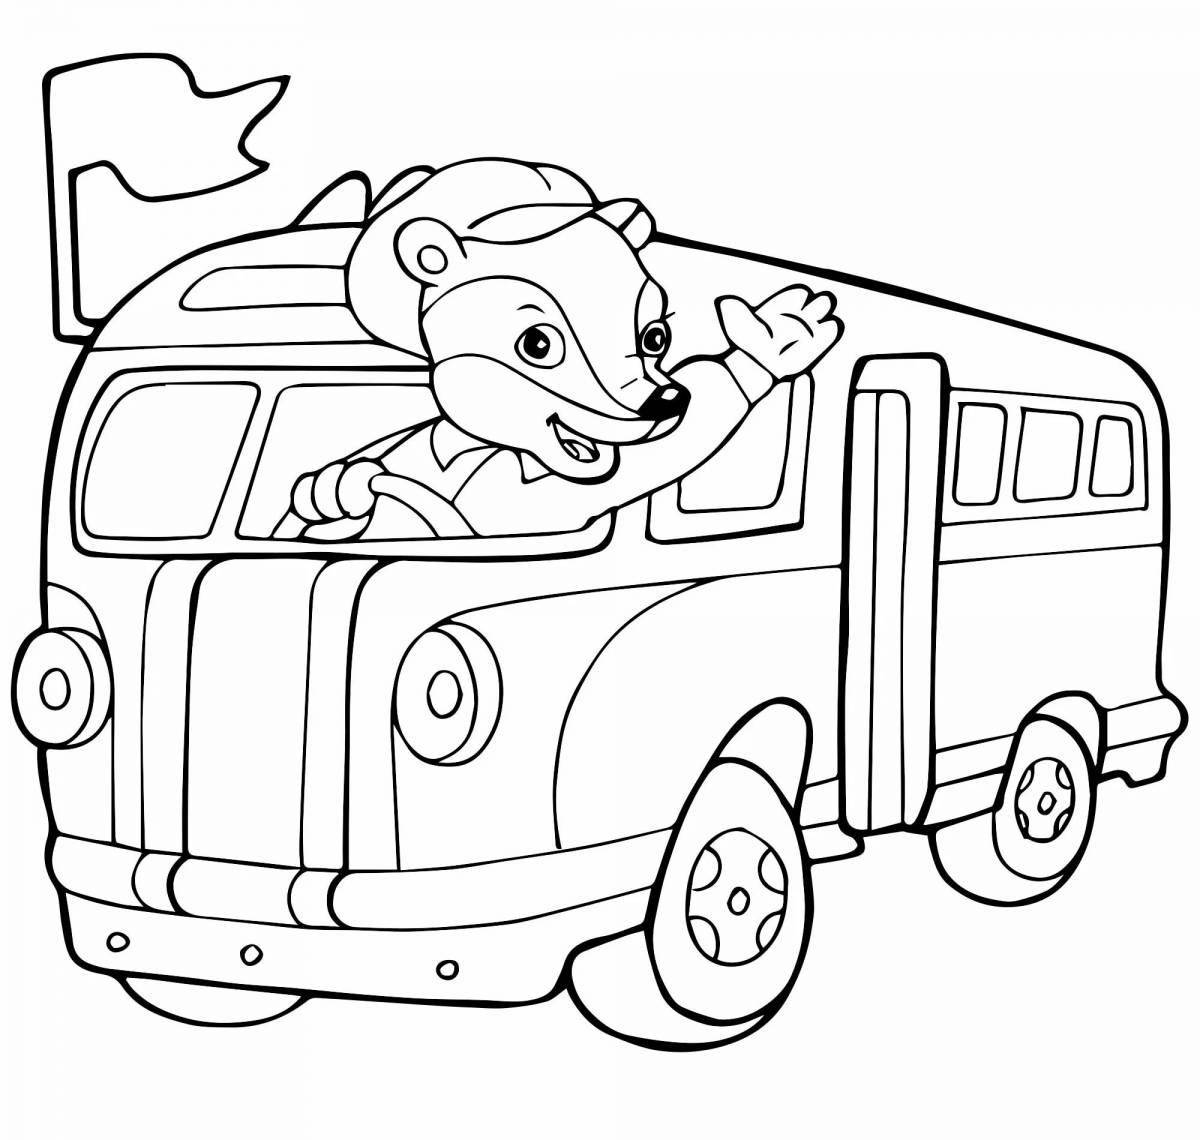 Fun coloring bus for children 4-5 years old